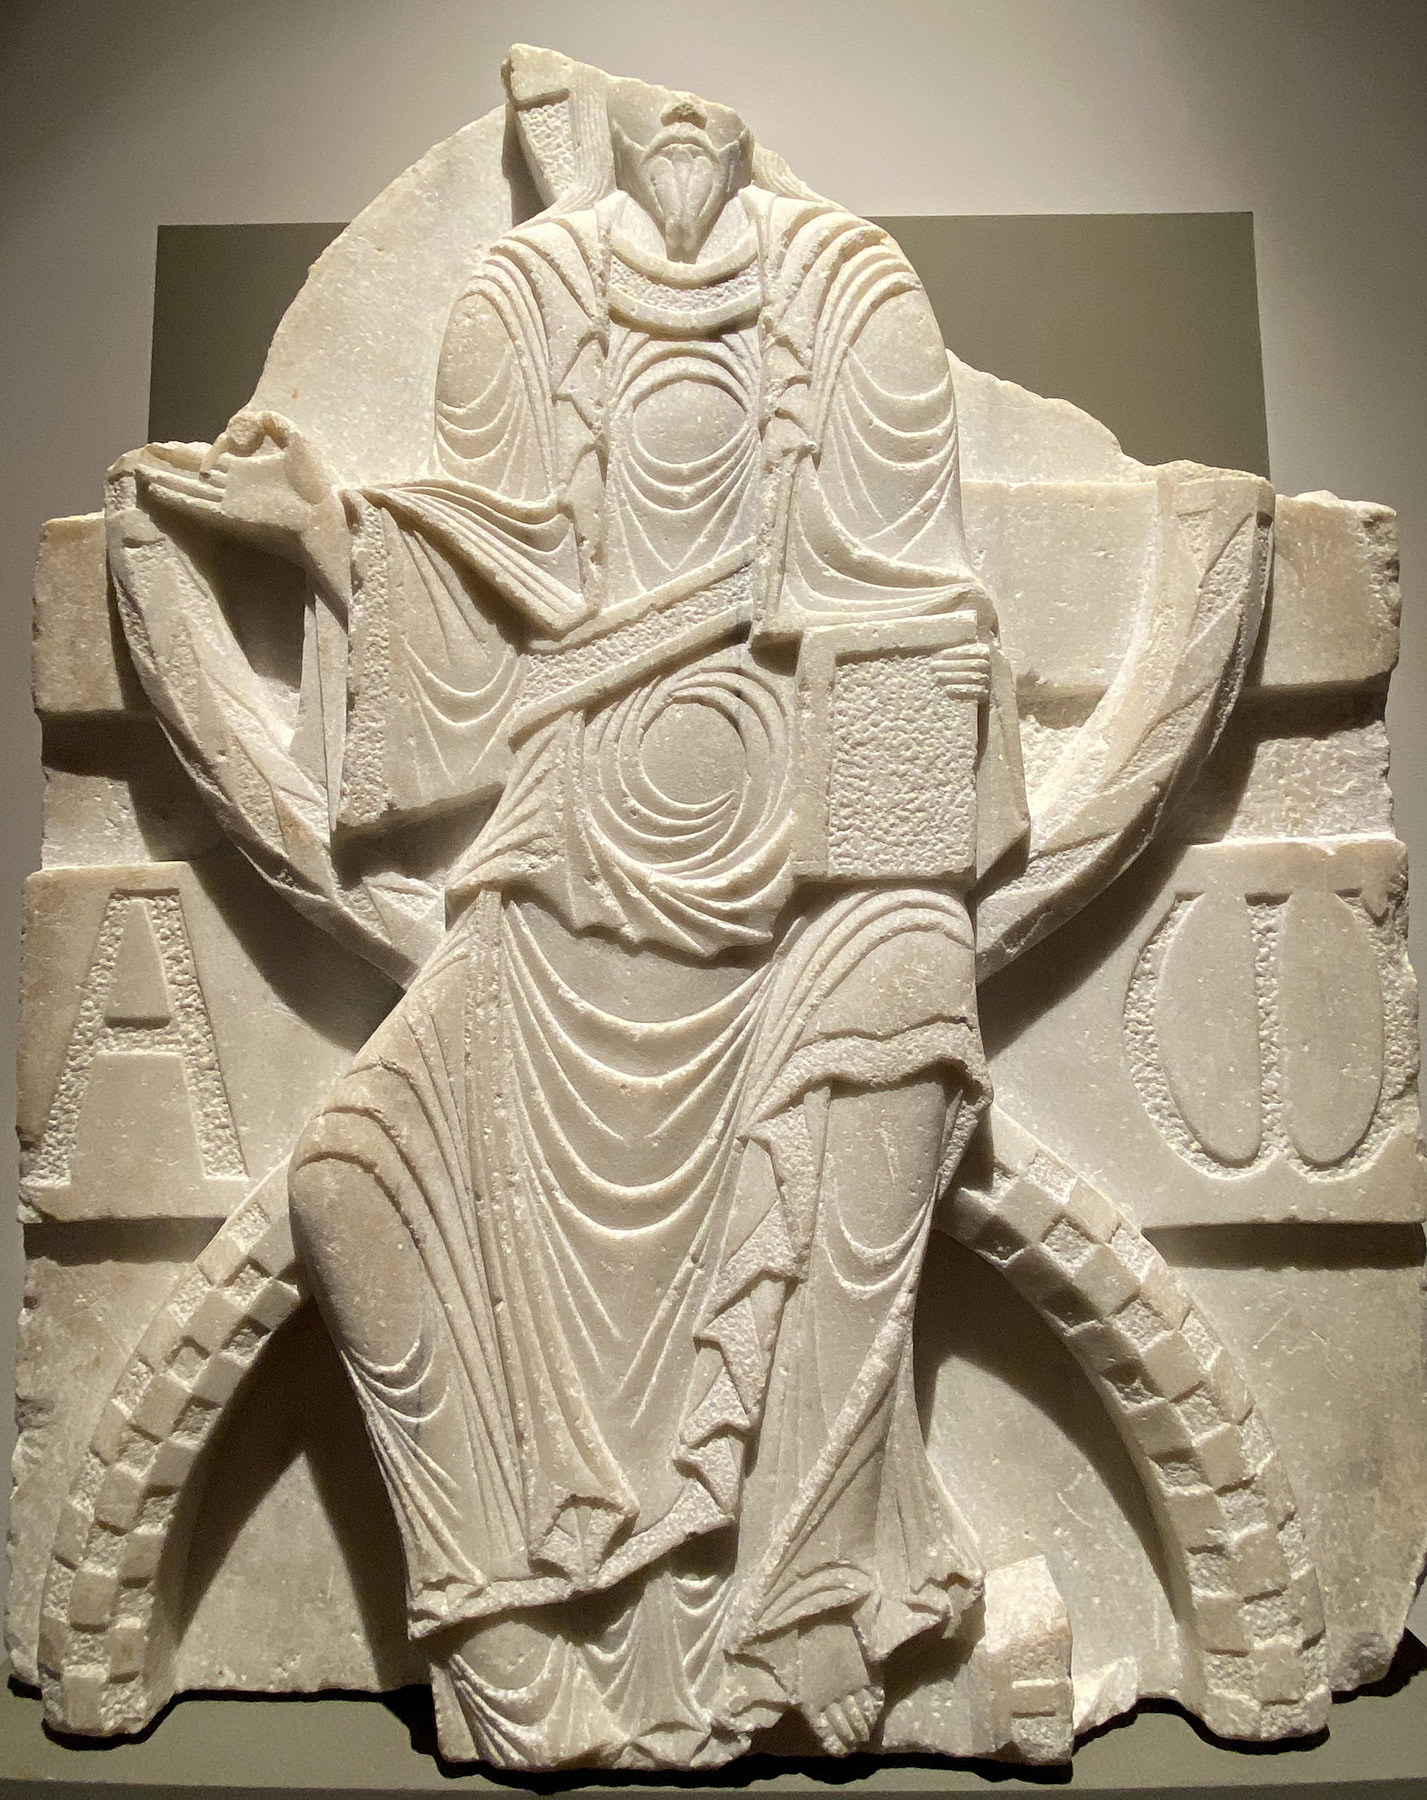 A fragment of white marble with a representation of a seated, bearded man with damaged head, holding a small round object in his right hand and a book in his left hand, flanked by two large letters. 